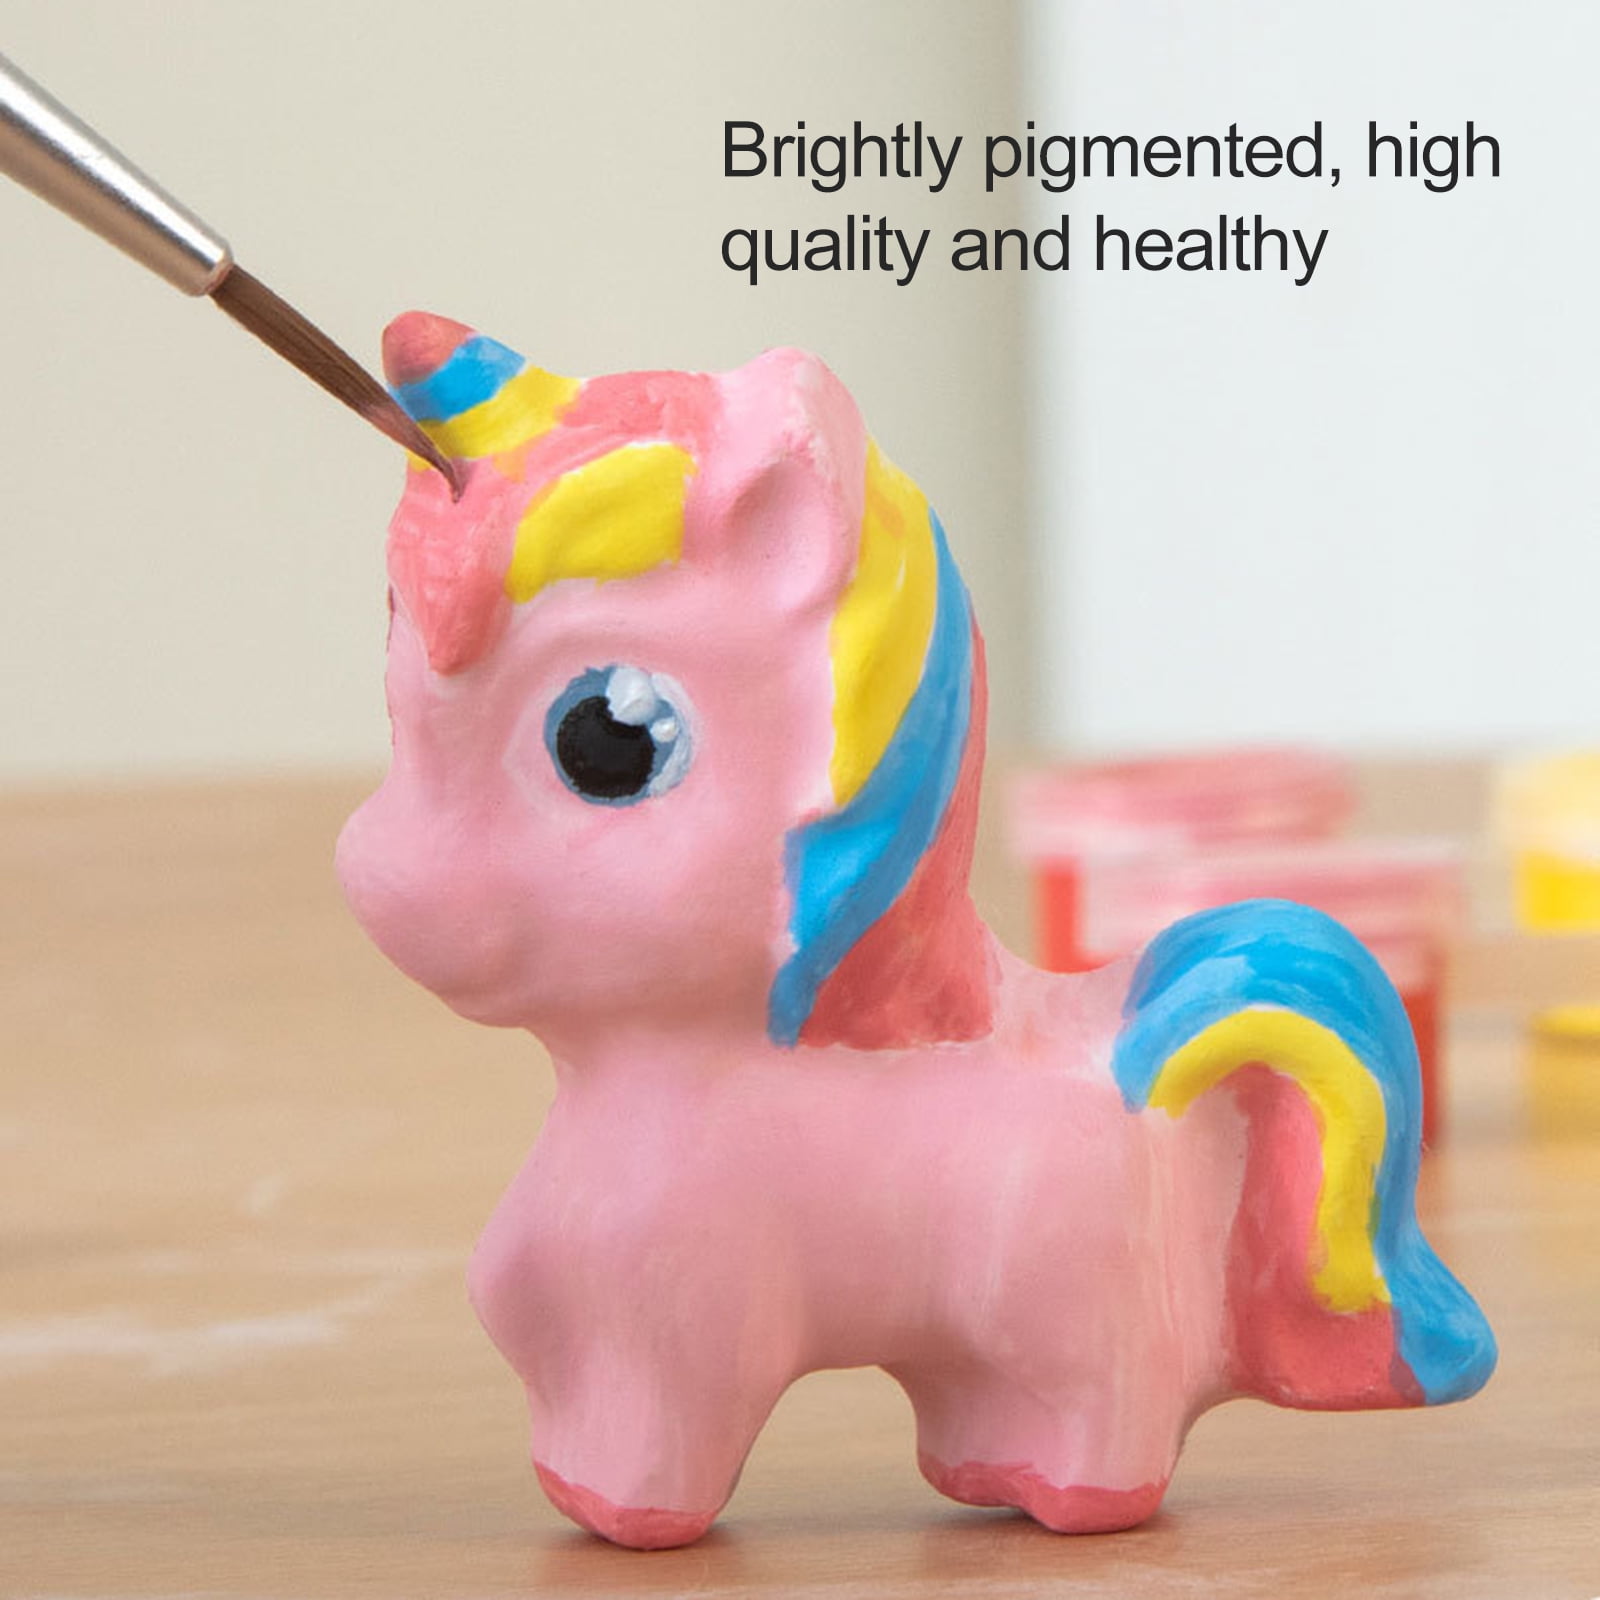 Made By Me Paint Your Own Anime Figurines, Art Supplies for Anime  Enthusiasts, Kids Arts & Crafts Painting Kit, Creative Toys for Kids, Arts  and